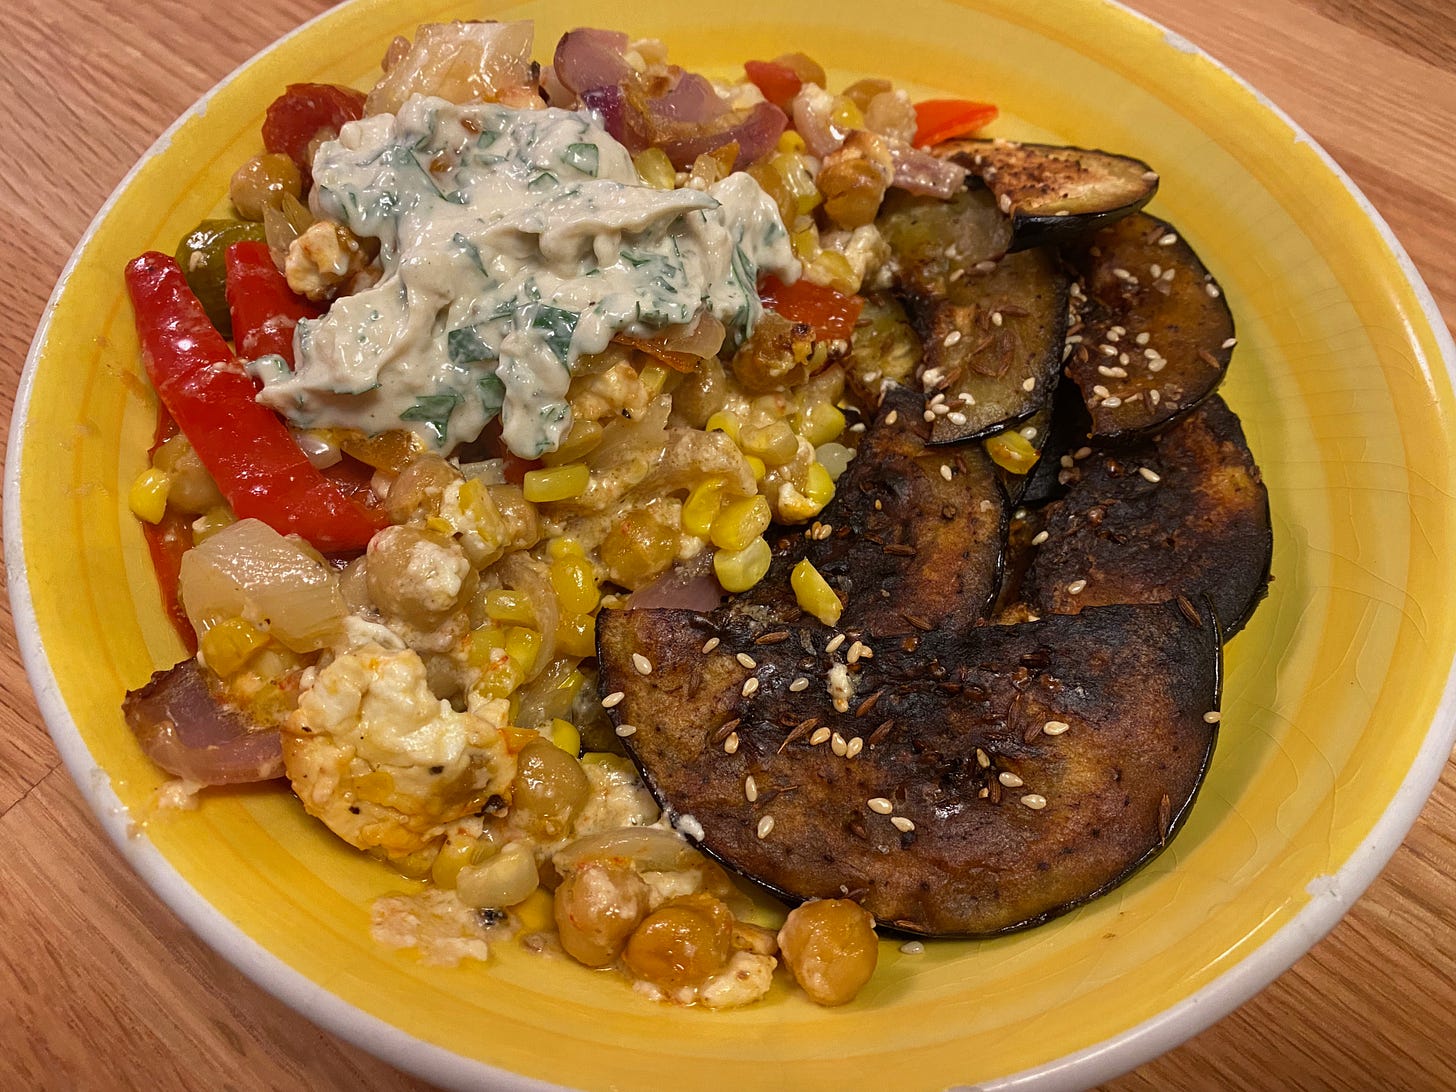 A wide yellow ceramic bowl filled with roasted corn, peppers, and chickpeas on one side and crispy half-moon eggplant slices on the other. The veggies are topped with a dollop of creamy yogurt tahini sauce flecked with parsley.